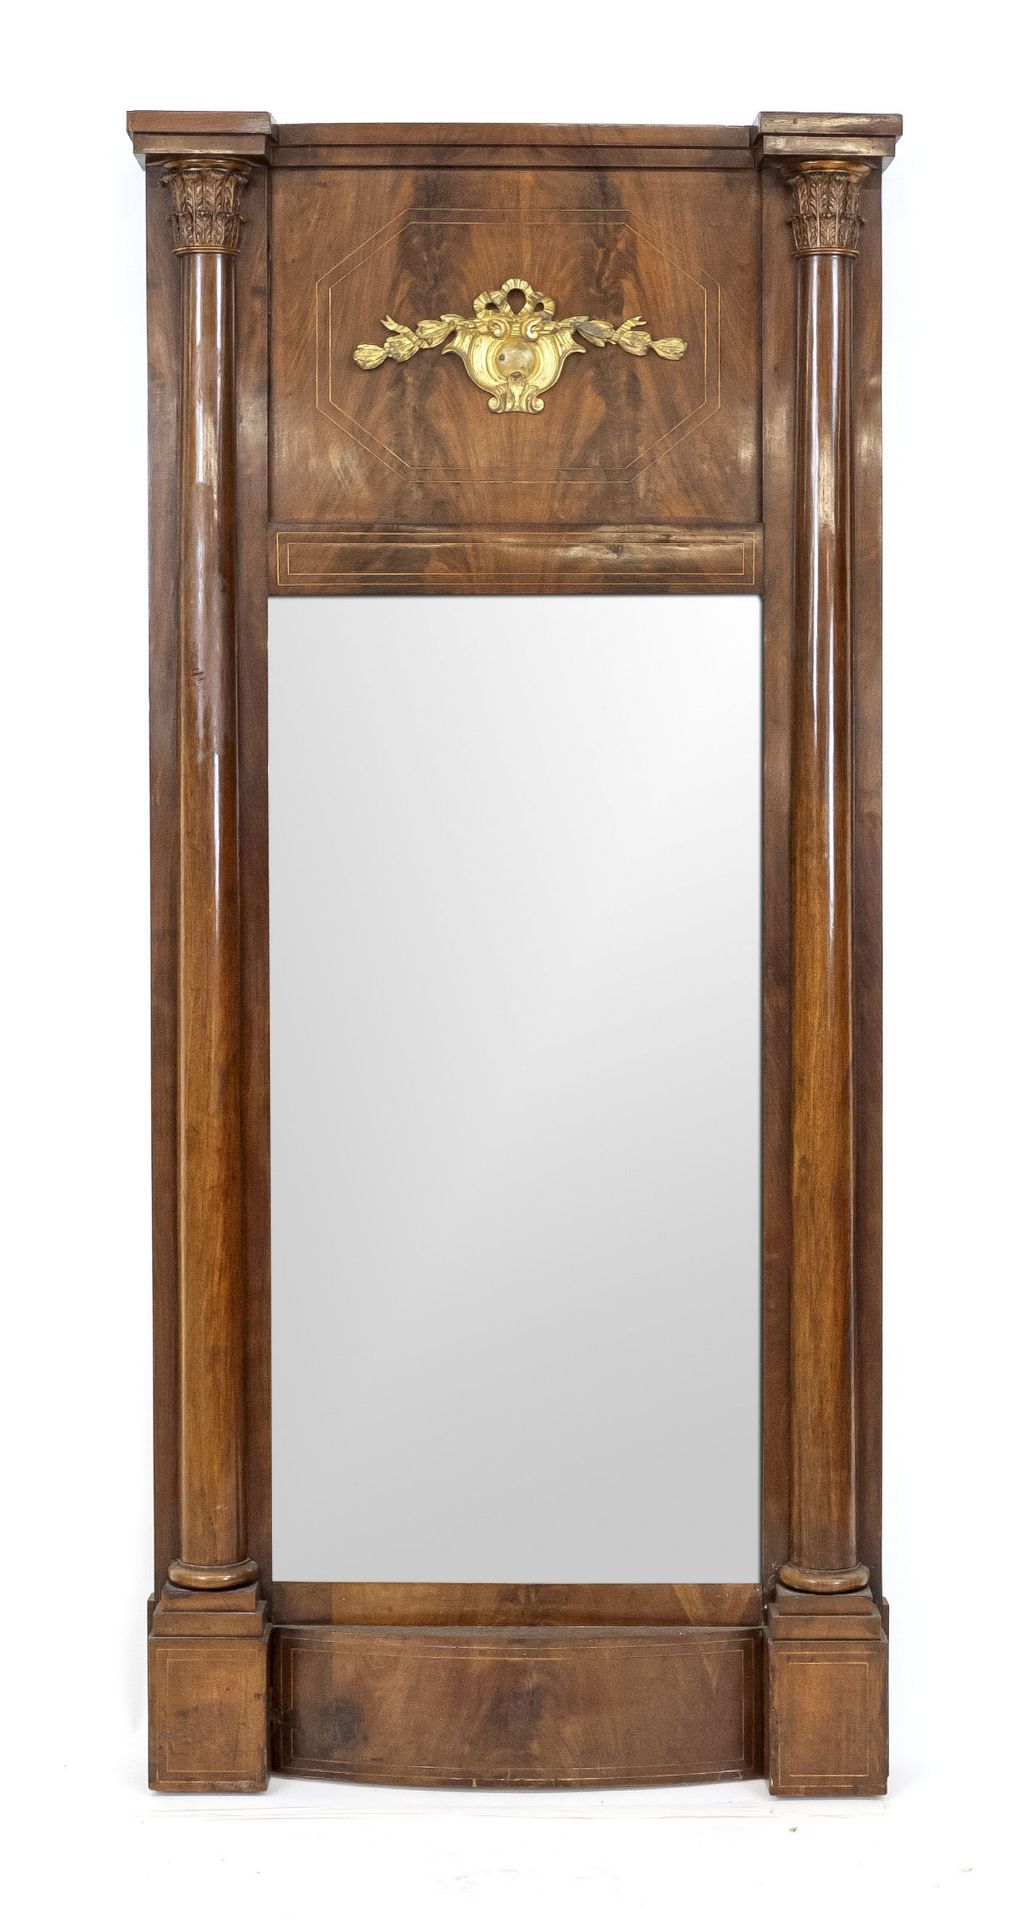 Mirror, 19th century, solid mahogany and veneered. Mirror flanked by columns, with a gilded